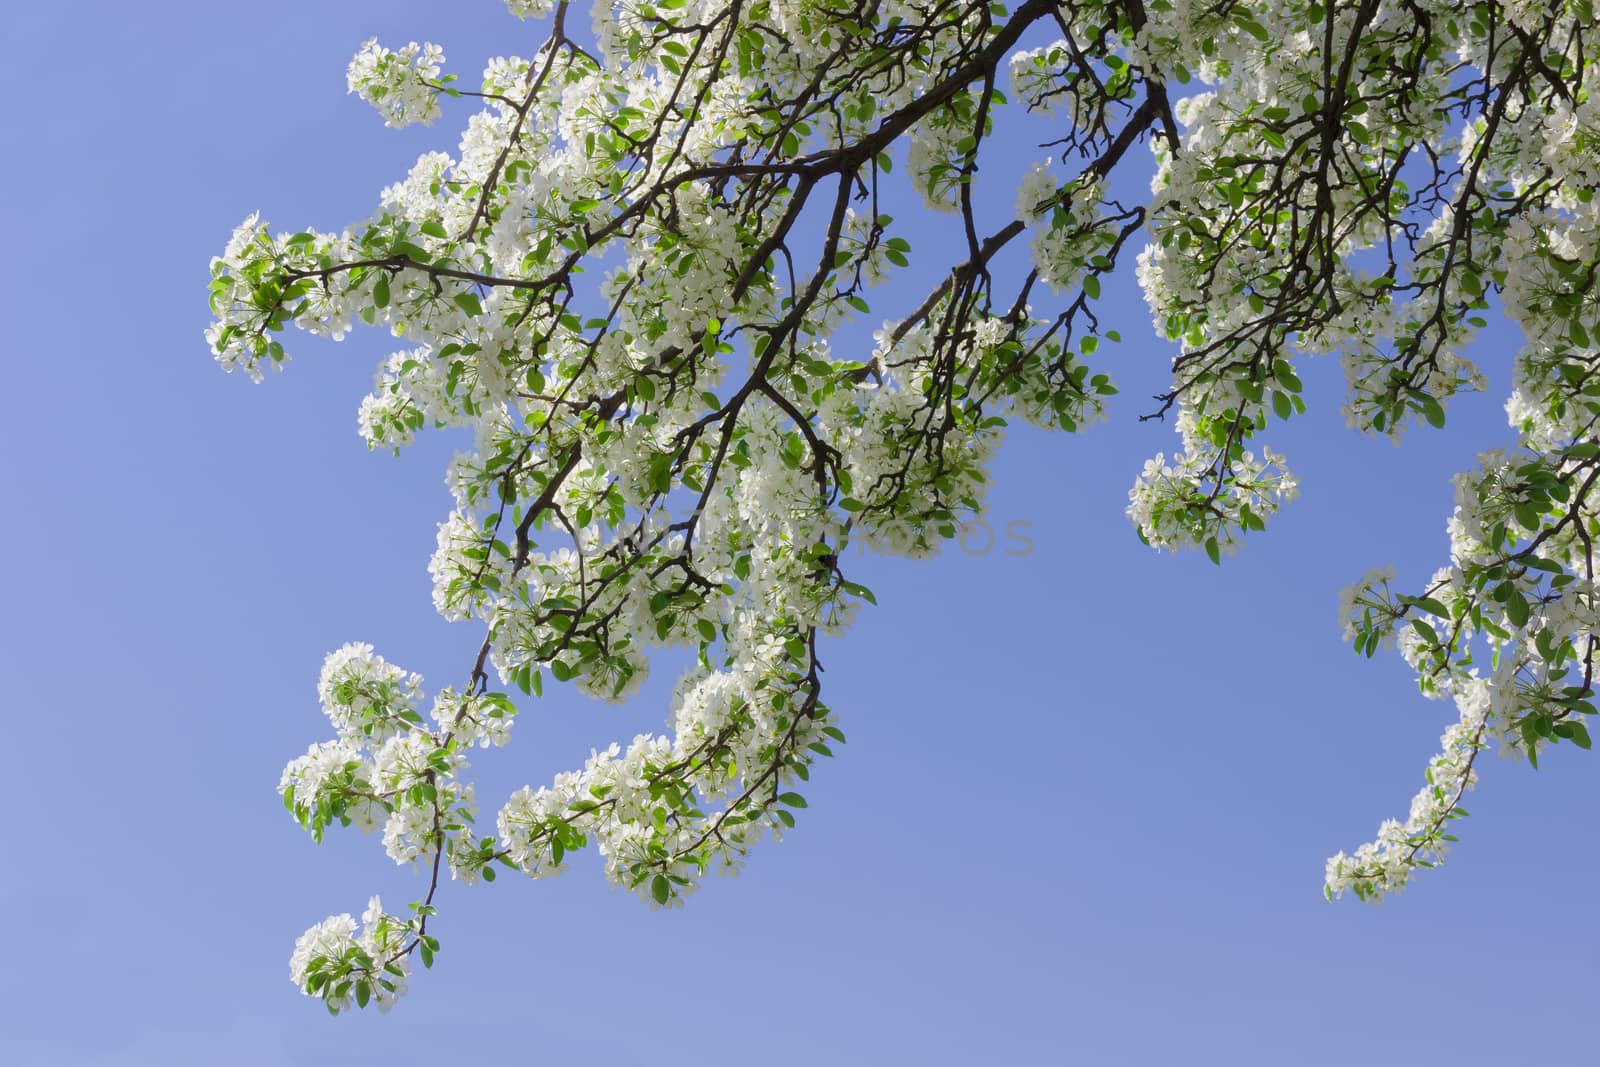 Flowering branches of old pear tree against the sky
